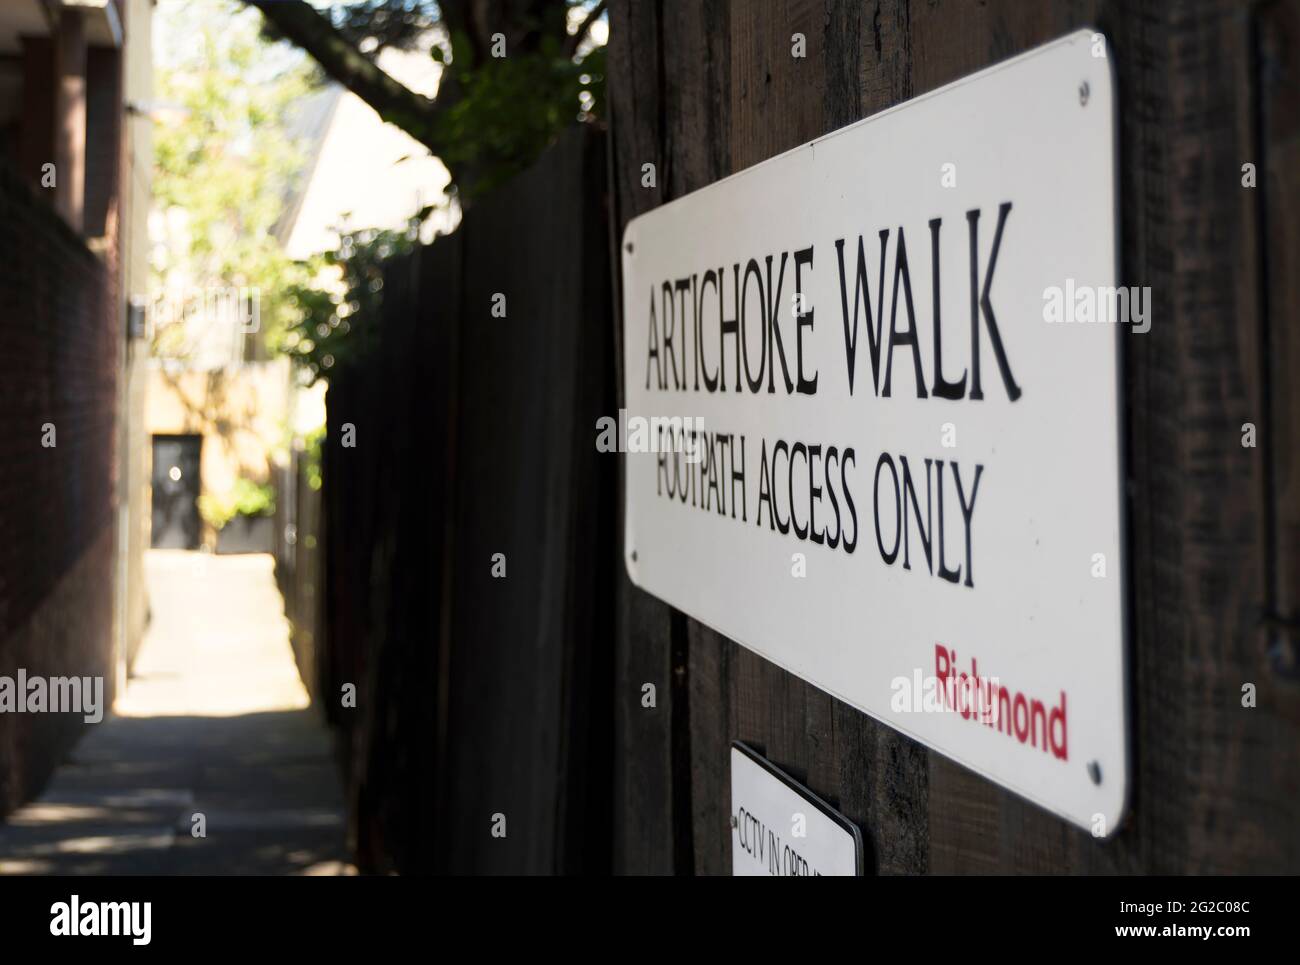 street name sign for artichoke walk, a pathway in richmond upon thames, surrey, england Stock Photo